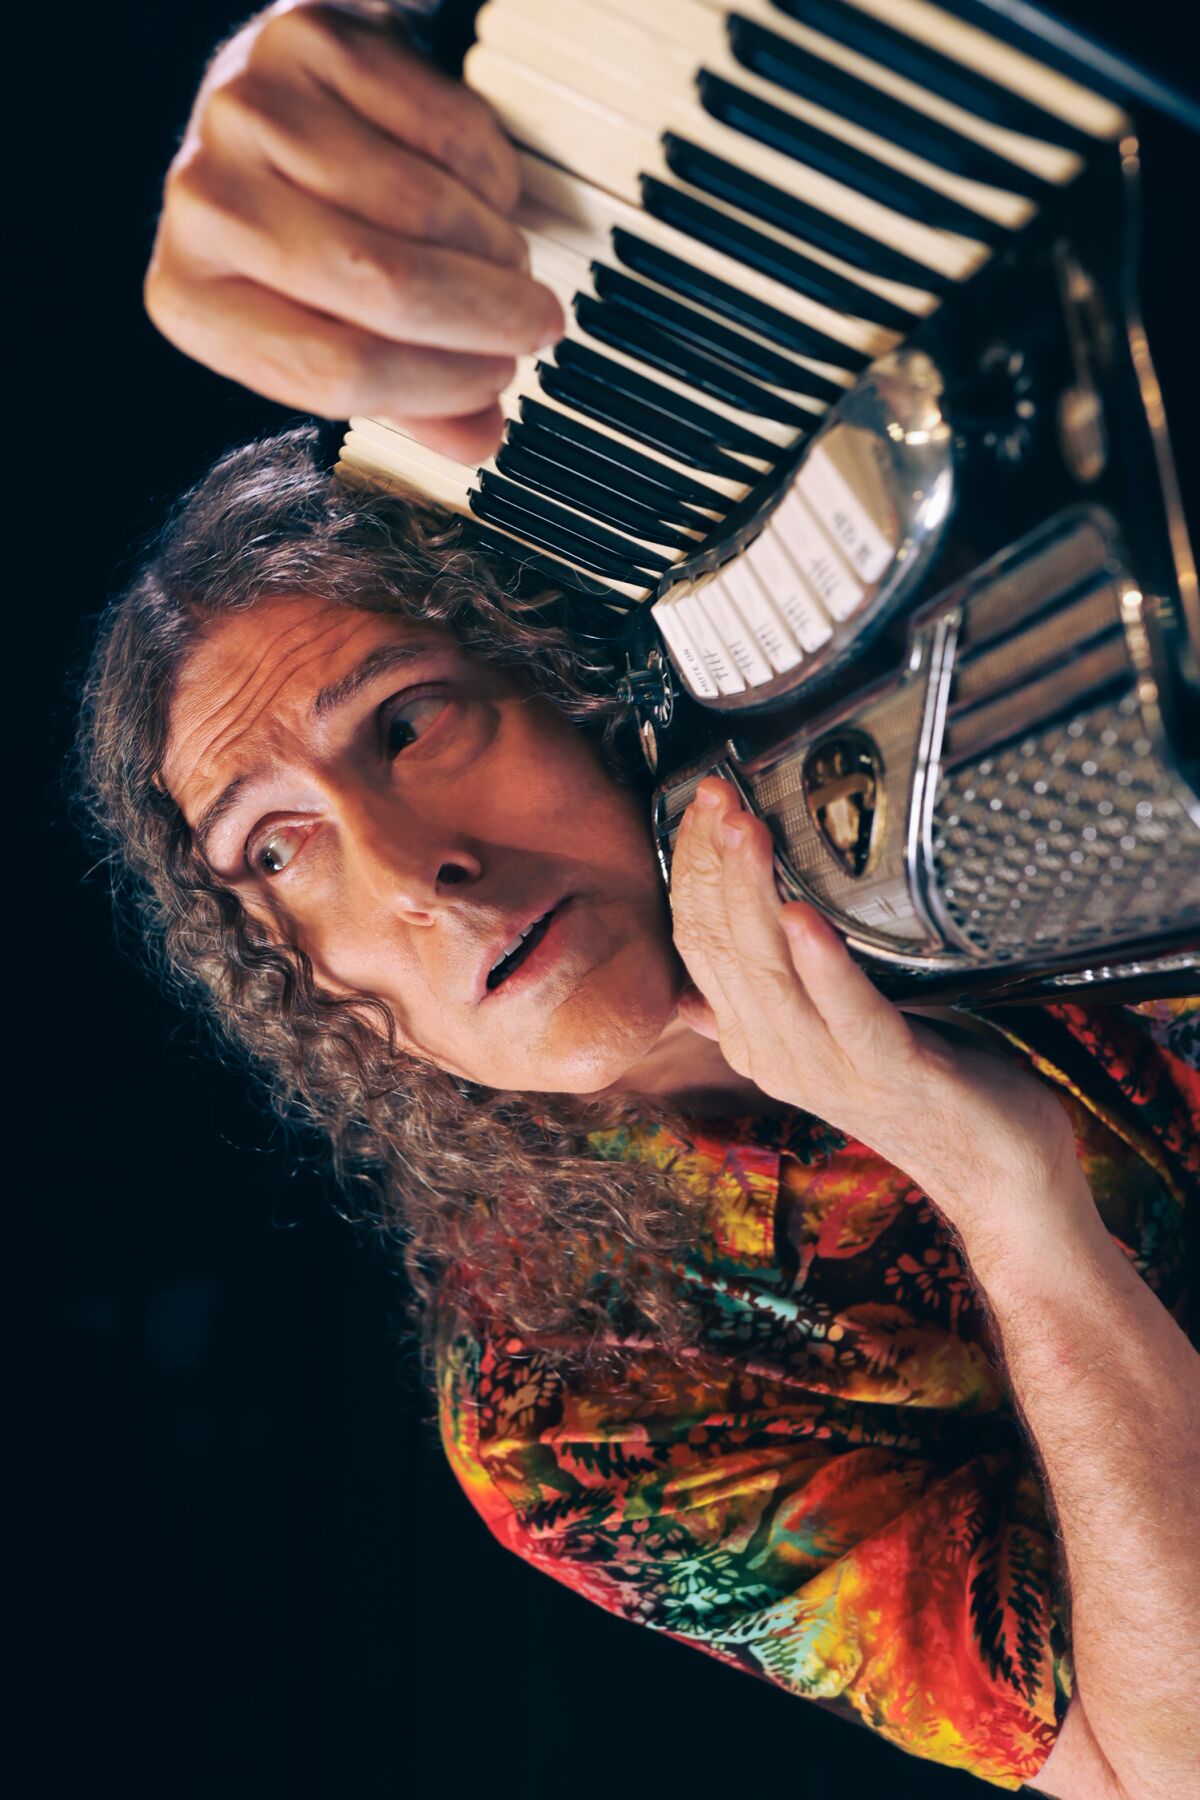 A man lovingly embracing his accordion, staring emotively off in space